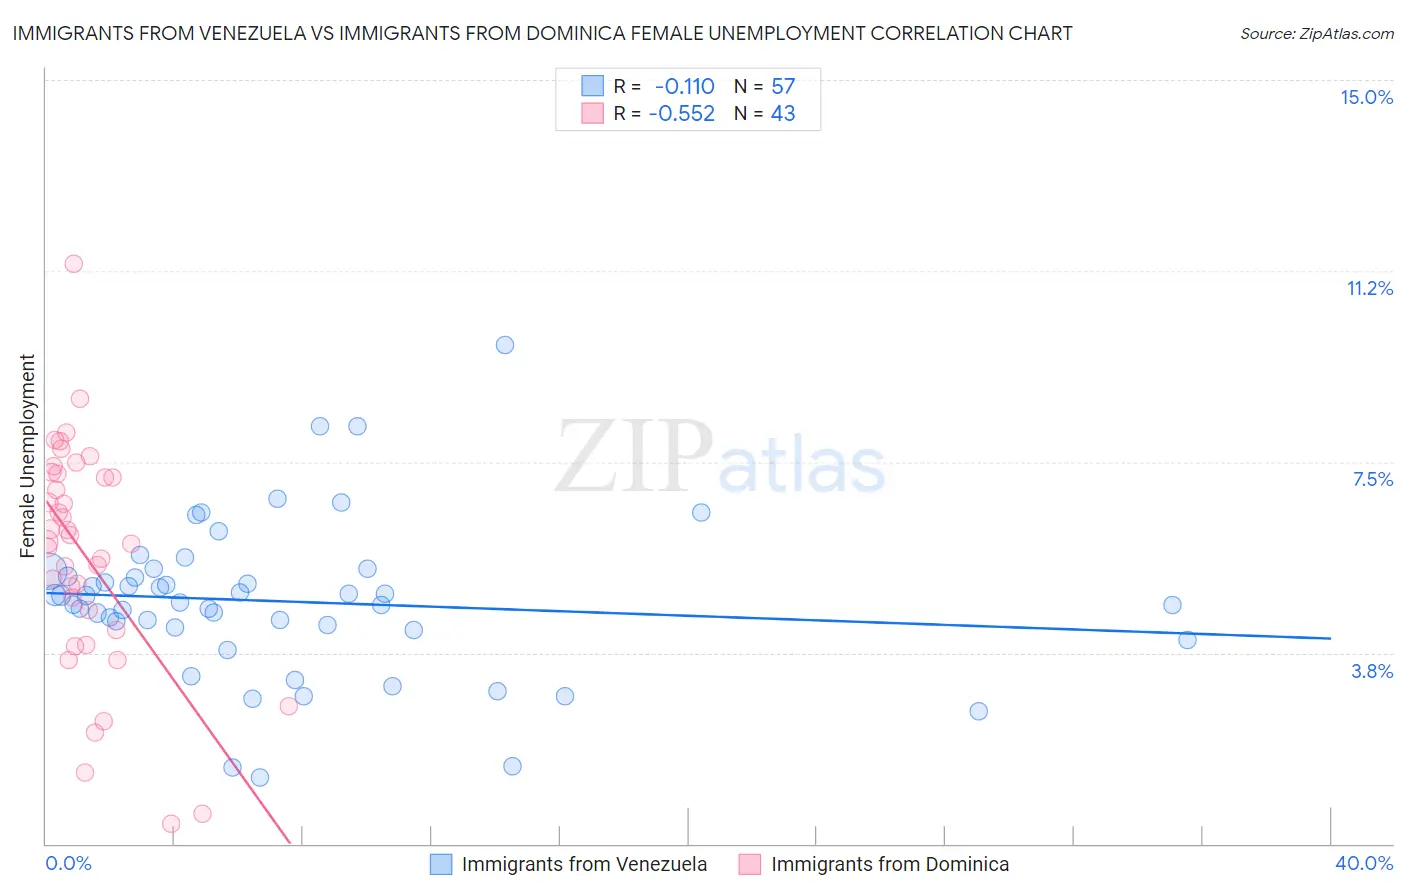 Immigrants from Venezuela vs Immigrants from Dominica Female Unemployment